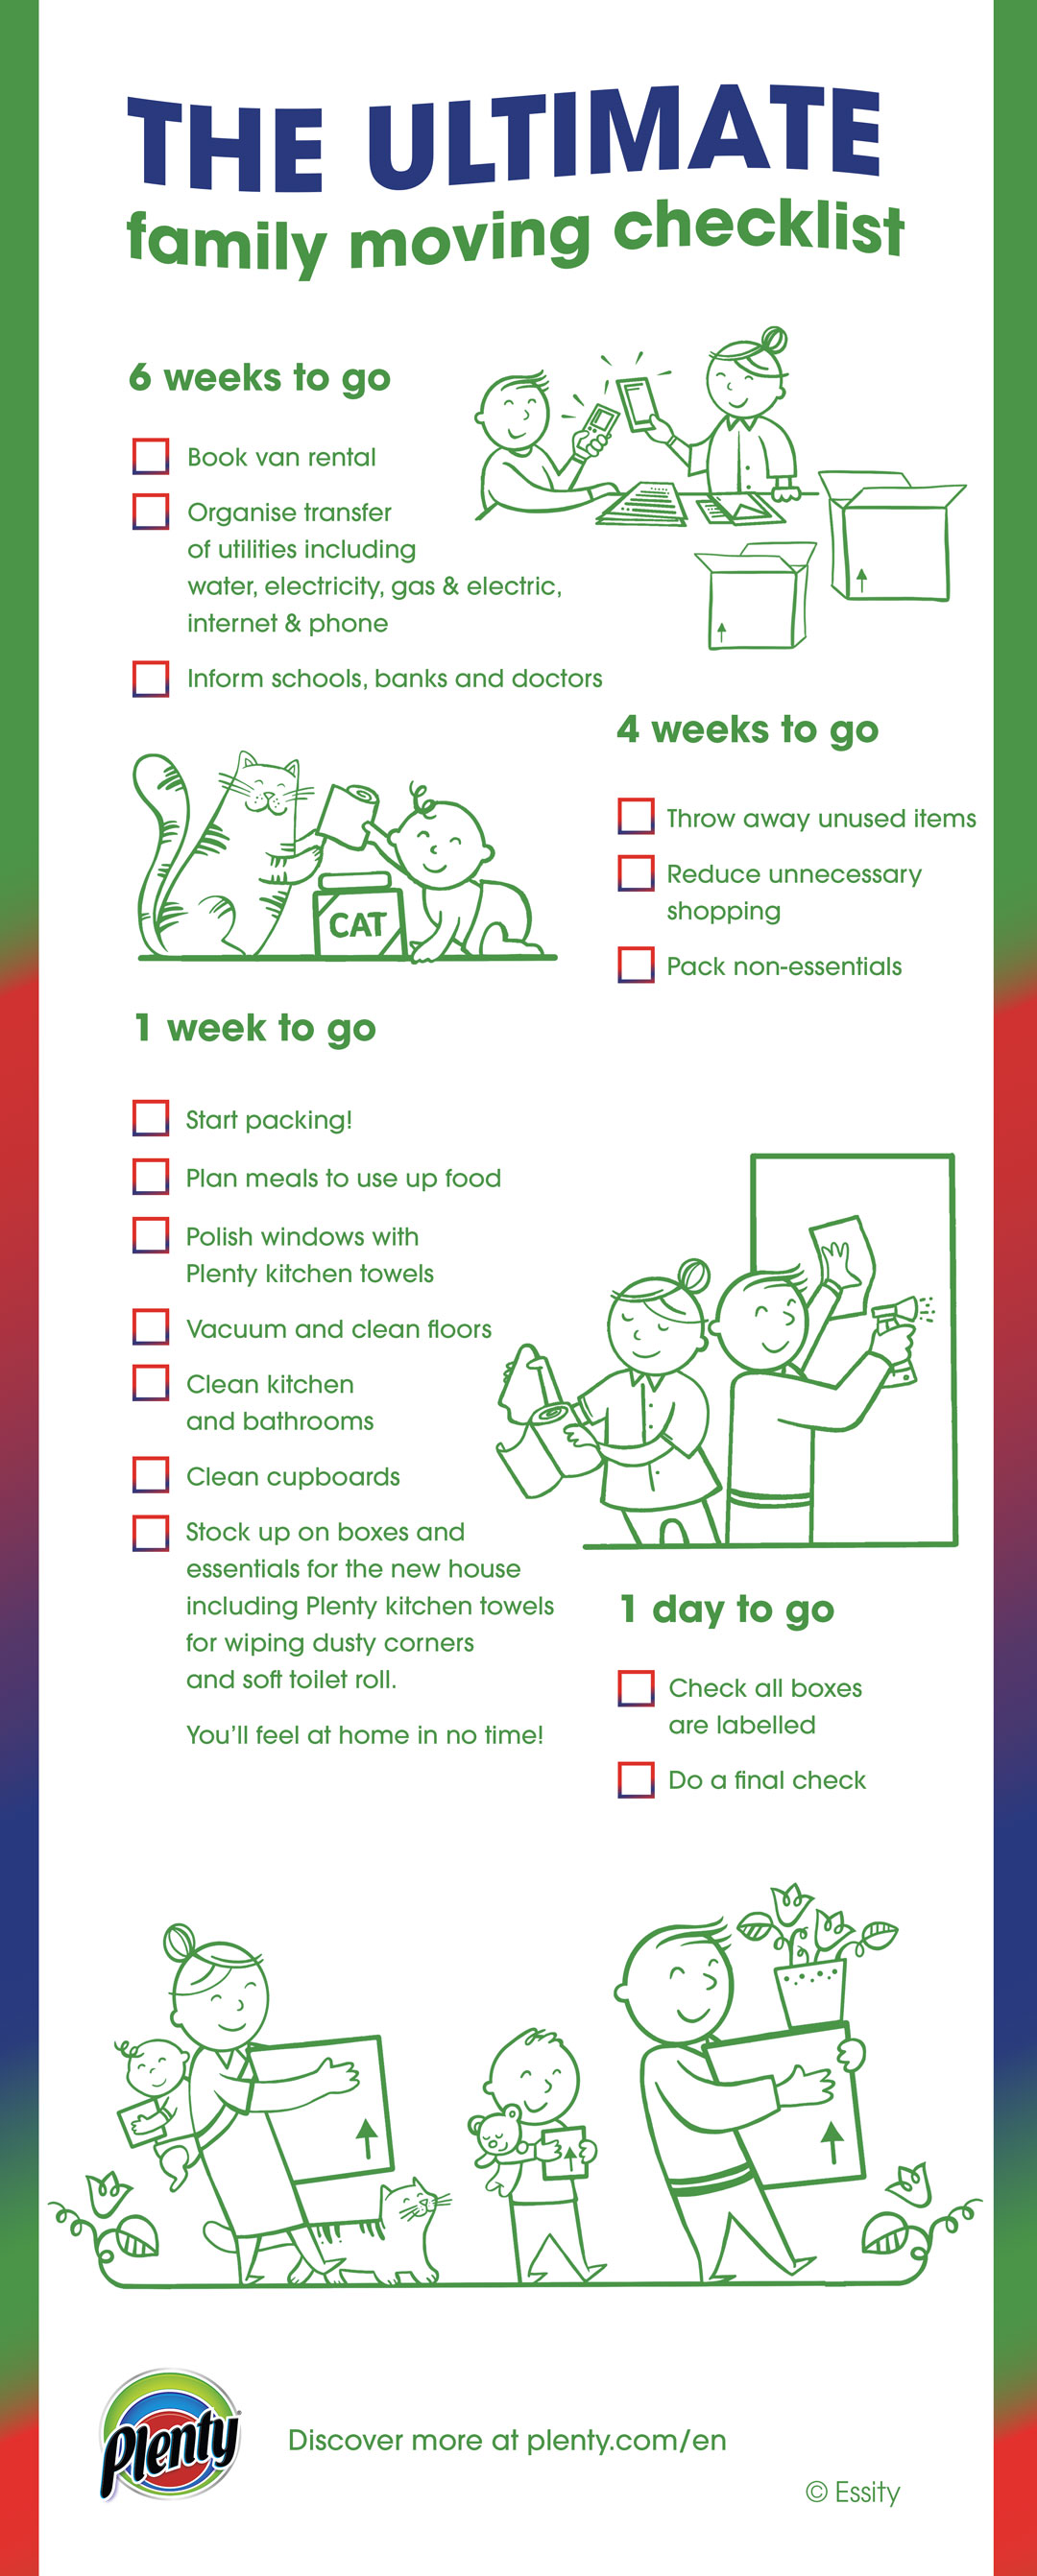 The Essential Moving Day Checklist